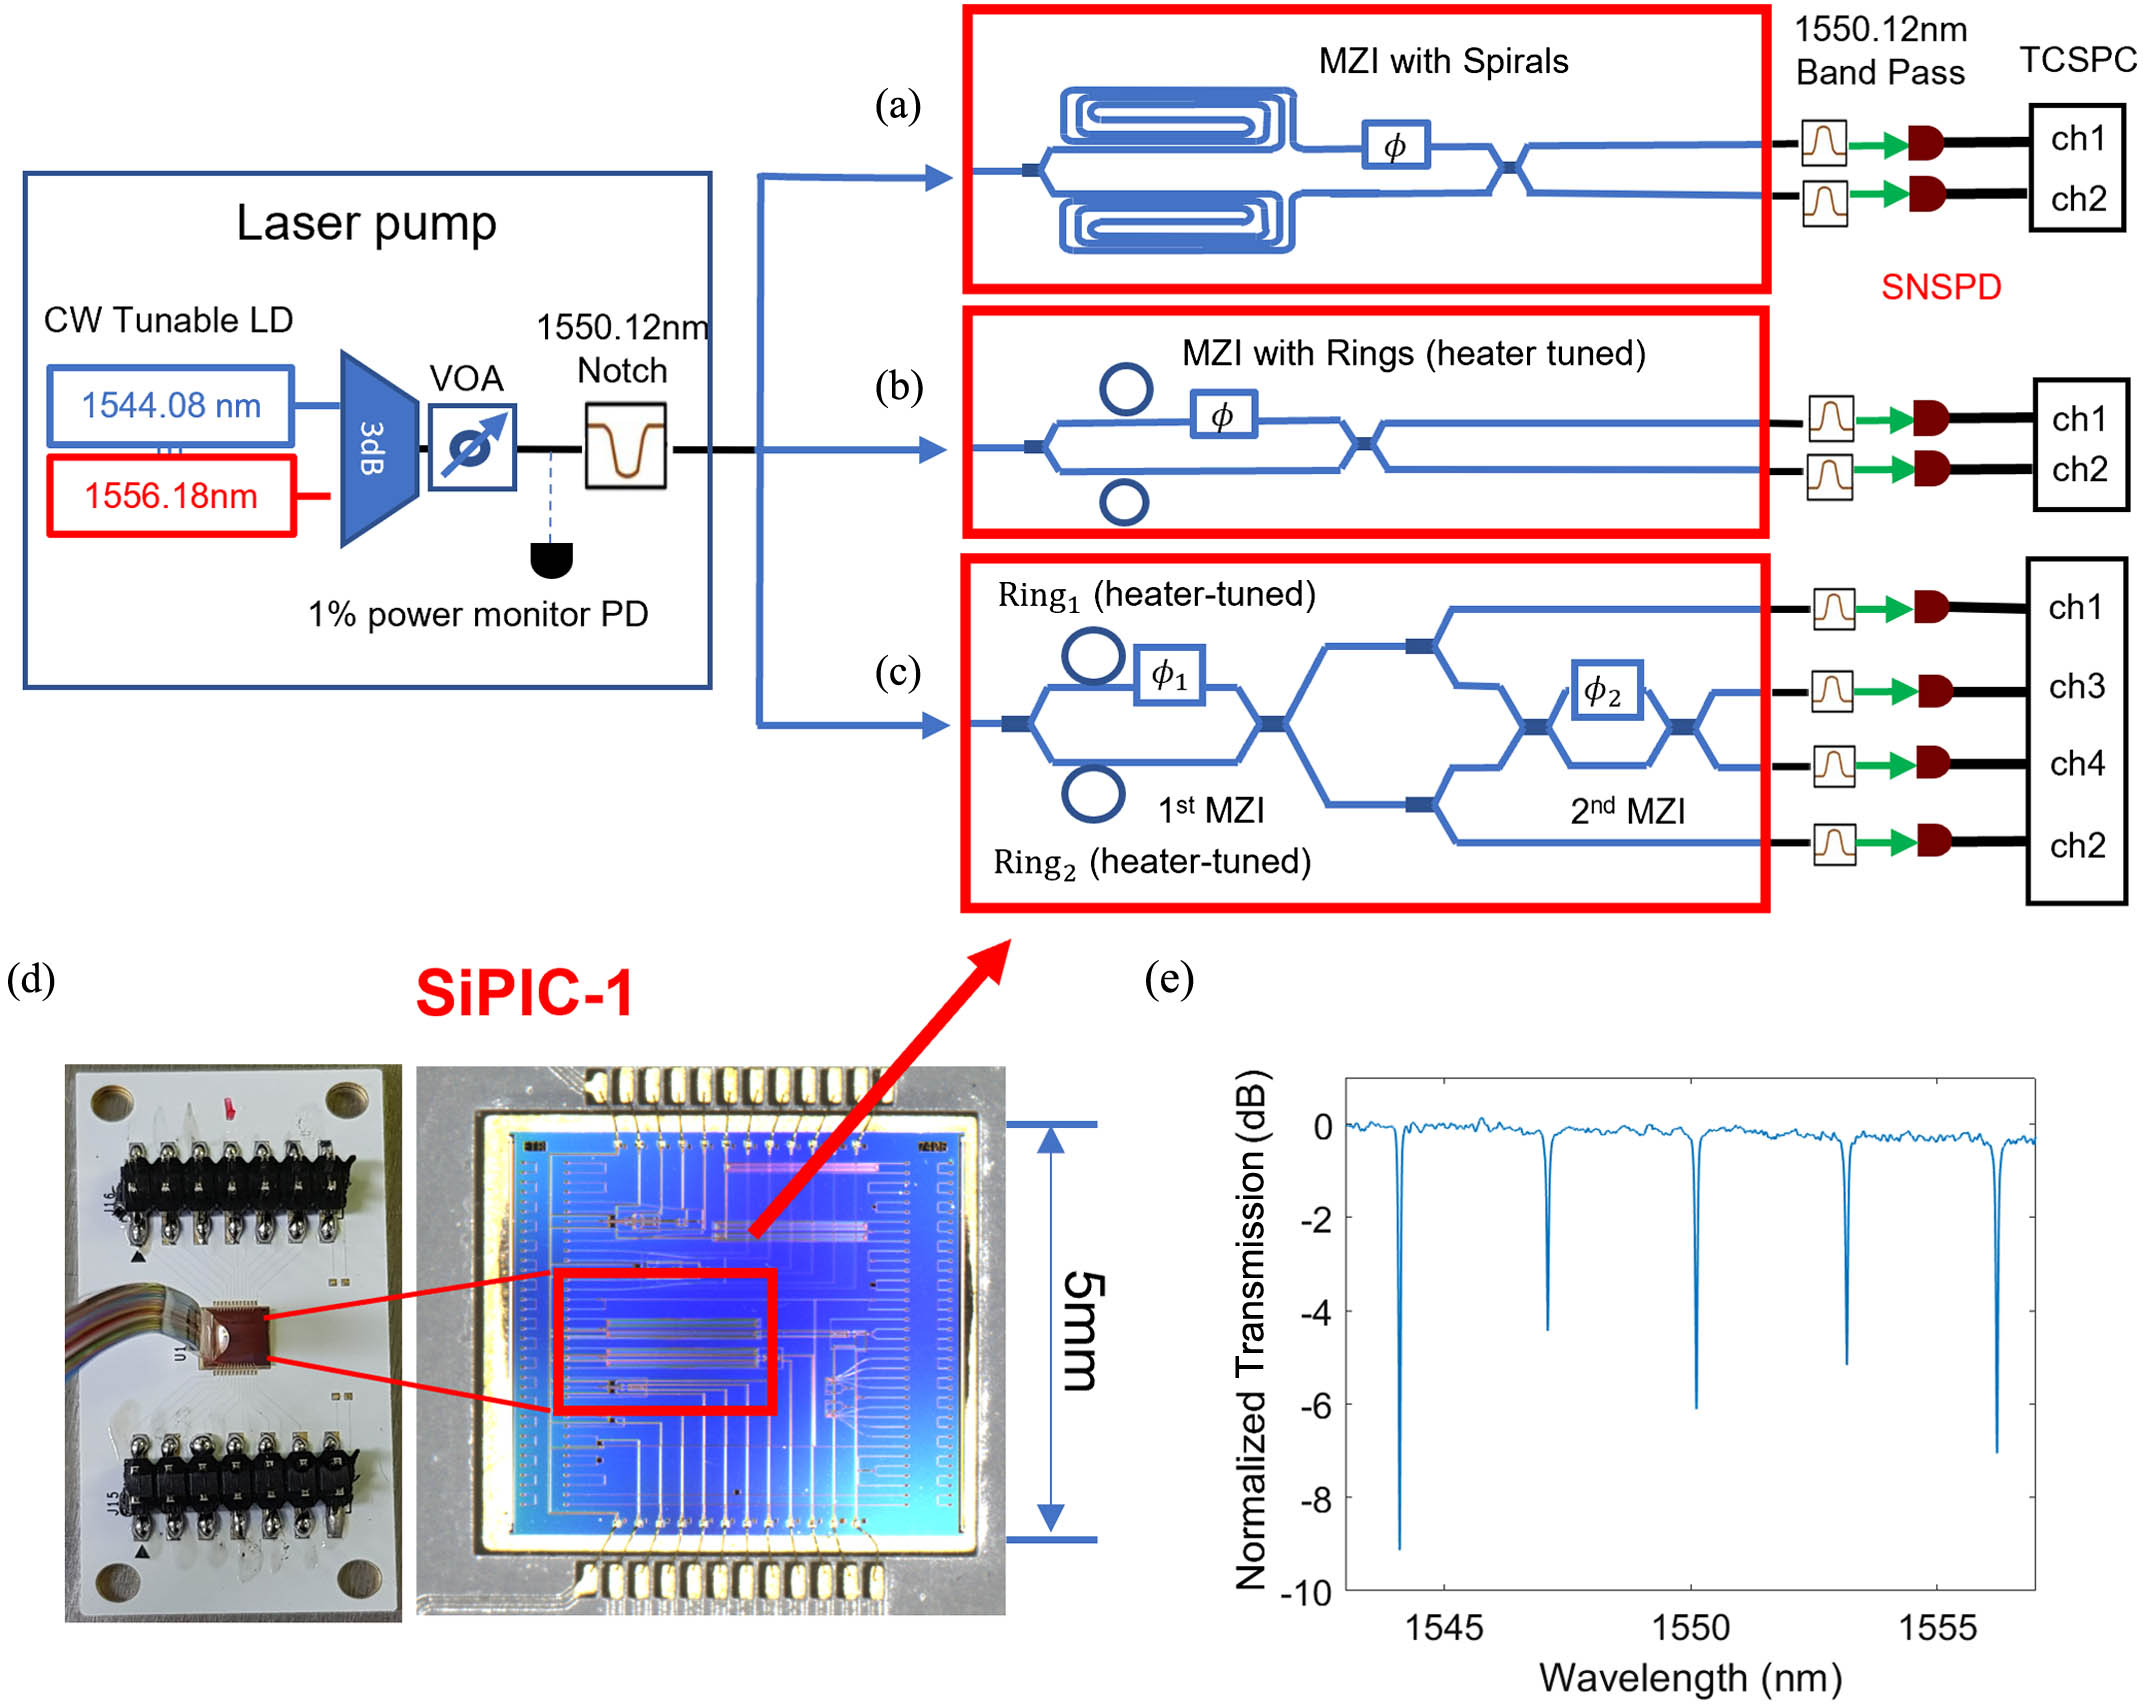 (top) Experimental set-up to measure photon-pair generation and multi-source quantum interference in SiPIC-1. The blue rectangle contains the pump laser’s apparatus. The thick blue lines with arrows represent the fibers coupling the pump beams to the SiPIC, which is represented by the different circuits enclosed by the red rectangles. The circuit in (a) represents the photon-pair sources based on spiral waveguides that form the two arms of an MZI. The circuit in (b) represents the photon-pair sources formed by the microrings. The circuit in (c) represents the composite photon-pair sources based on both waveguides and microrings. These are followed by a second MZI to measure the quantum interference of the generated photons. On the right, the detection channels (ch 1–ch 4) are represented. These are based on a sequence of optical fibers, band-pass filters, superconductor nanowire single photon detectors (SNSPDs), and a time-correlated single photon counting module interfaced to a computer for further processing. (d) On the left is the photograph of the packaged SiPIC-1 chip. On the right is the zoomed-in image of the chip with the circuit highlighted by the red rectangle. (e) The normalized transmission spectrum of the circuit in (b) when the two microring resonators are tuned in resonance with the pump photons wavelengths.